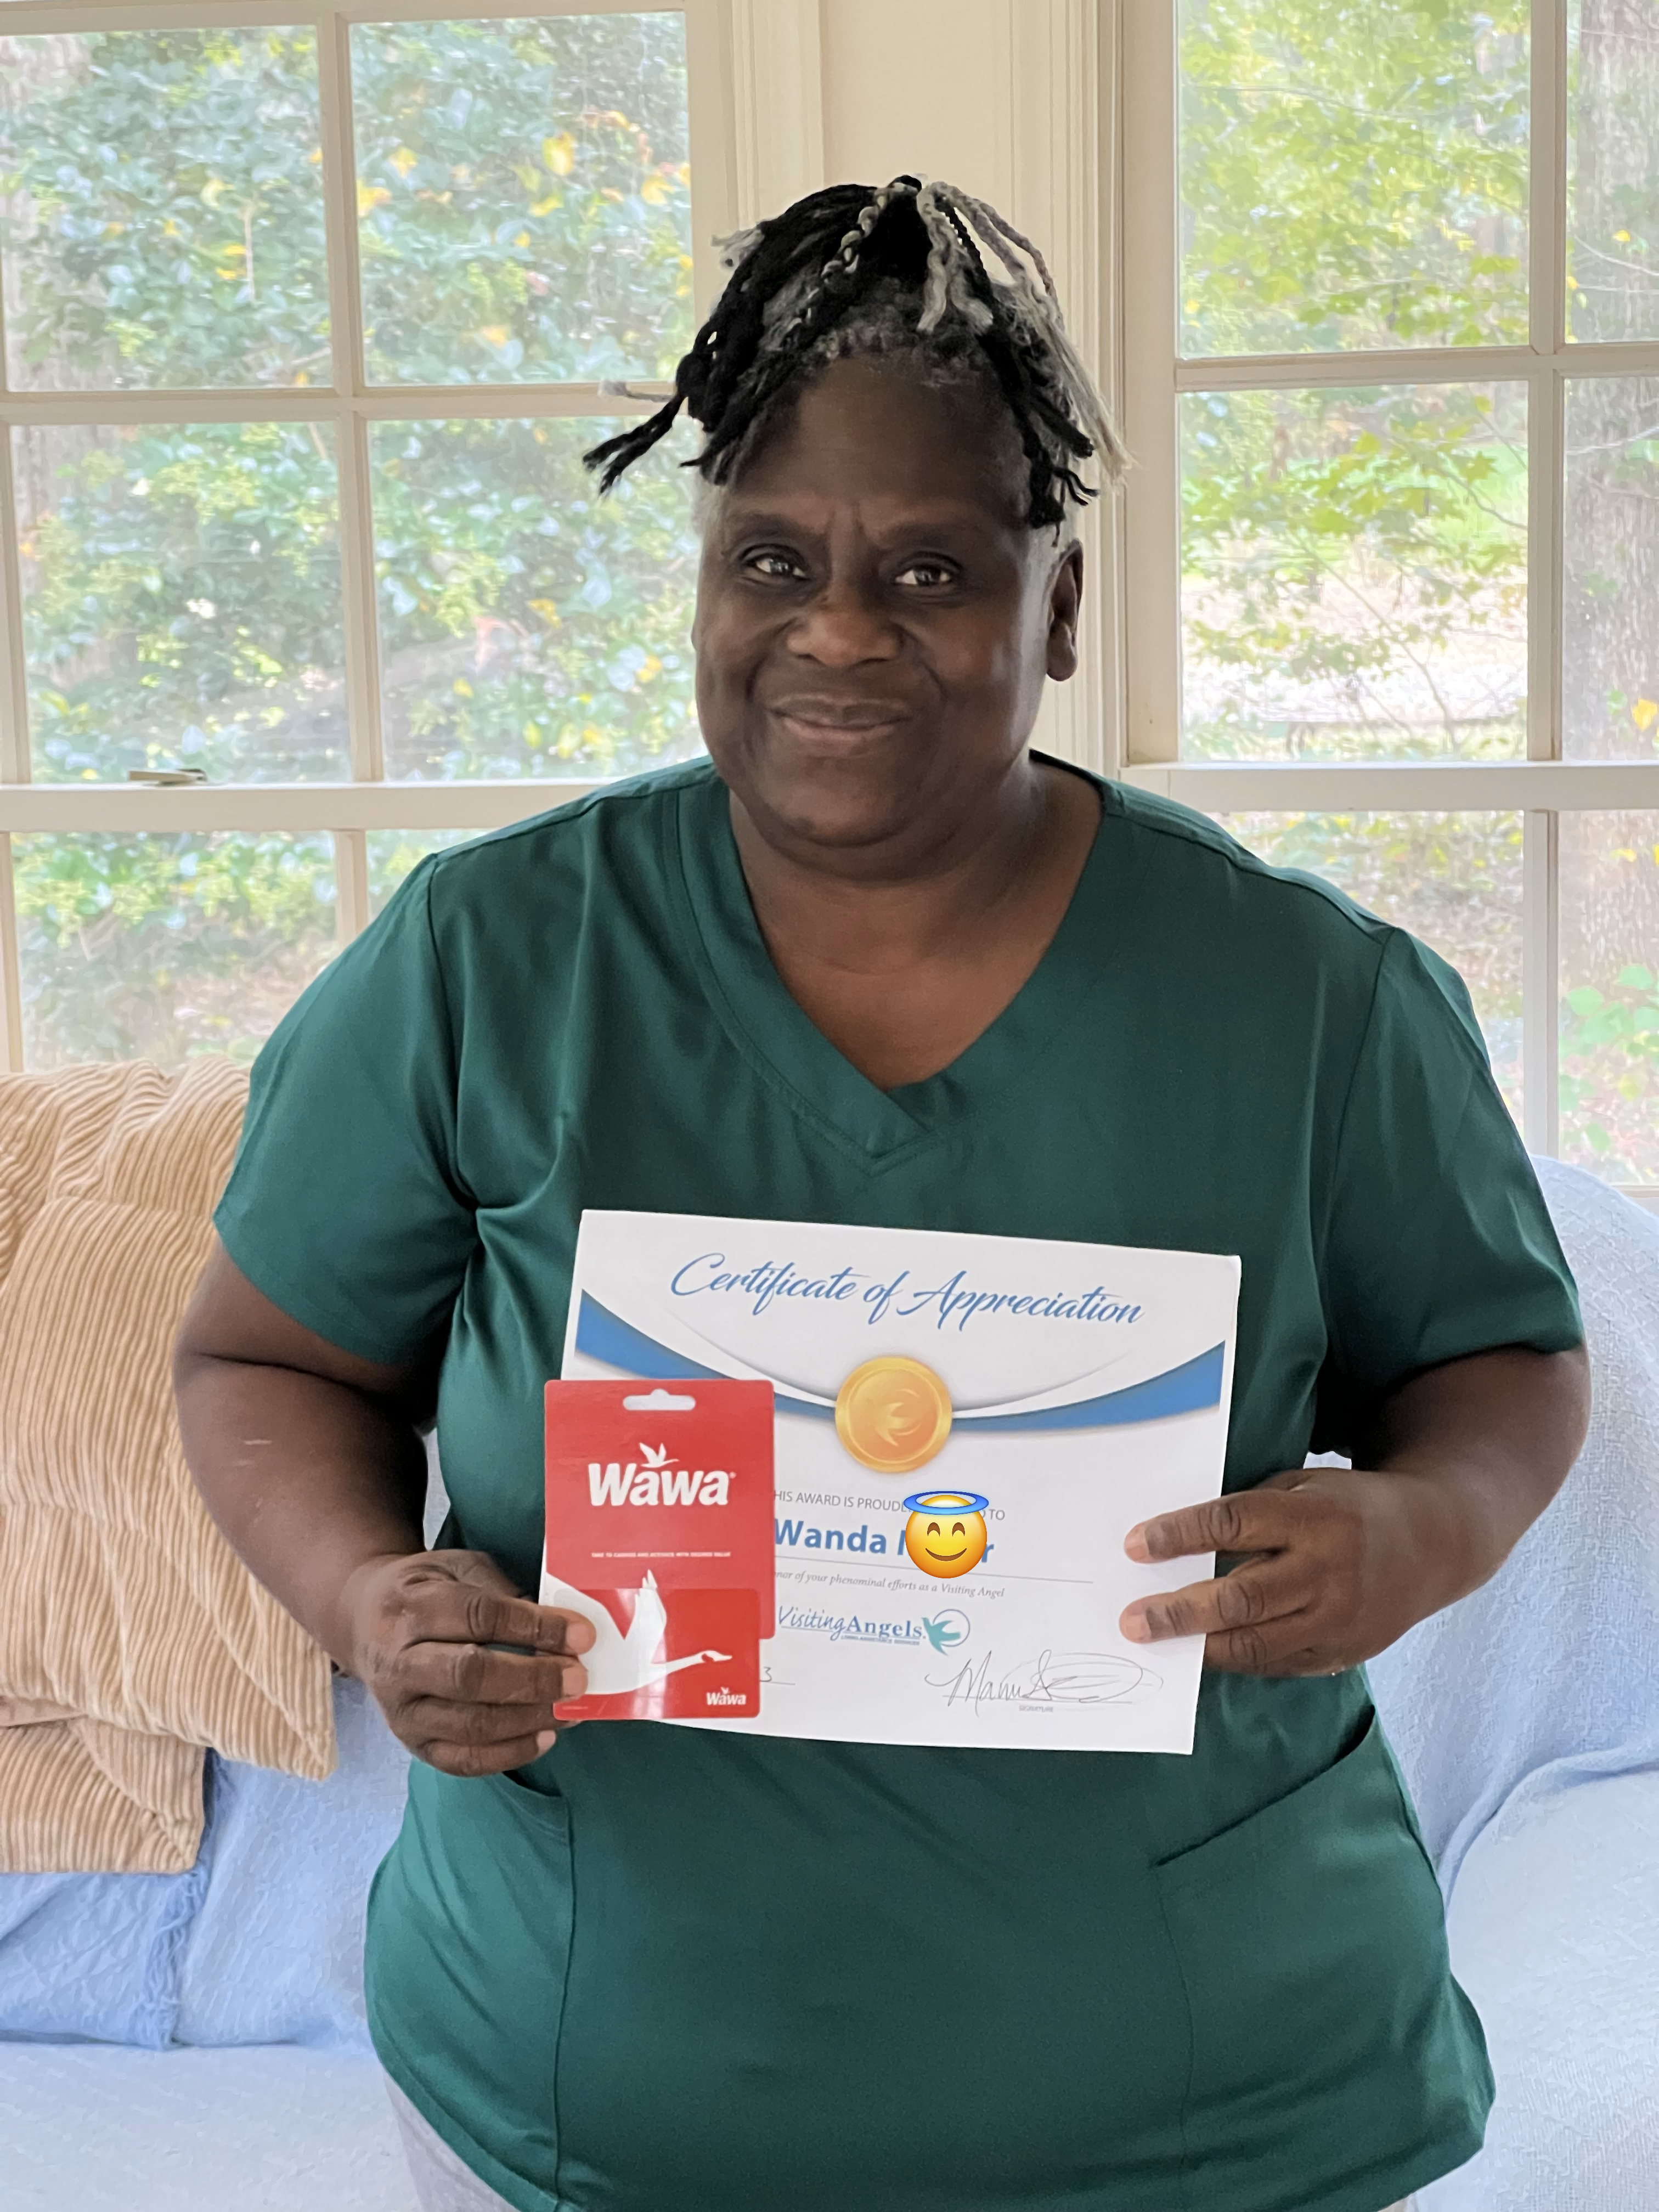 Caregiver holding certificate and gift card